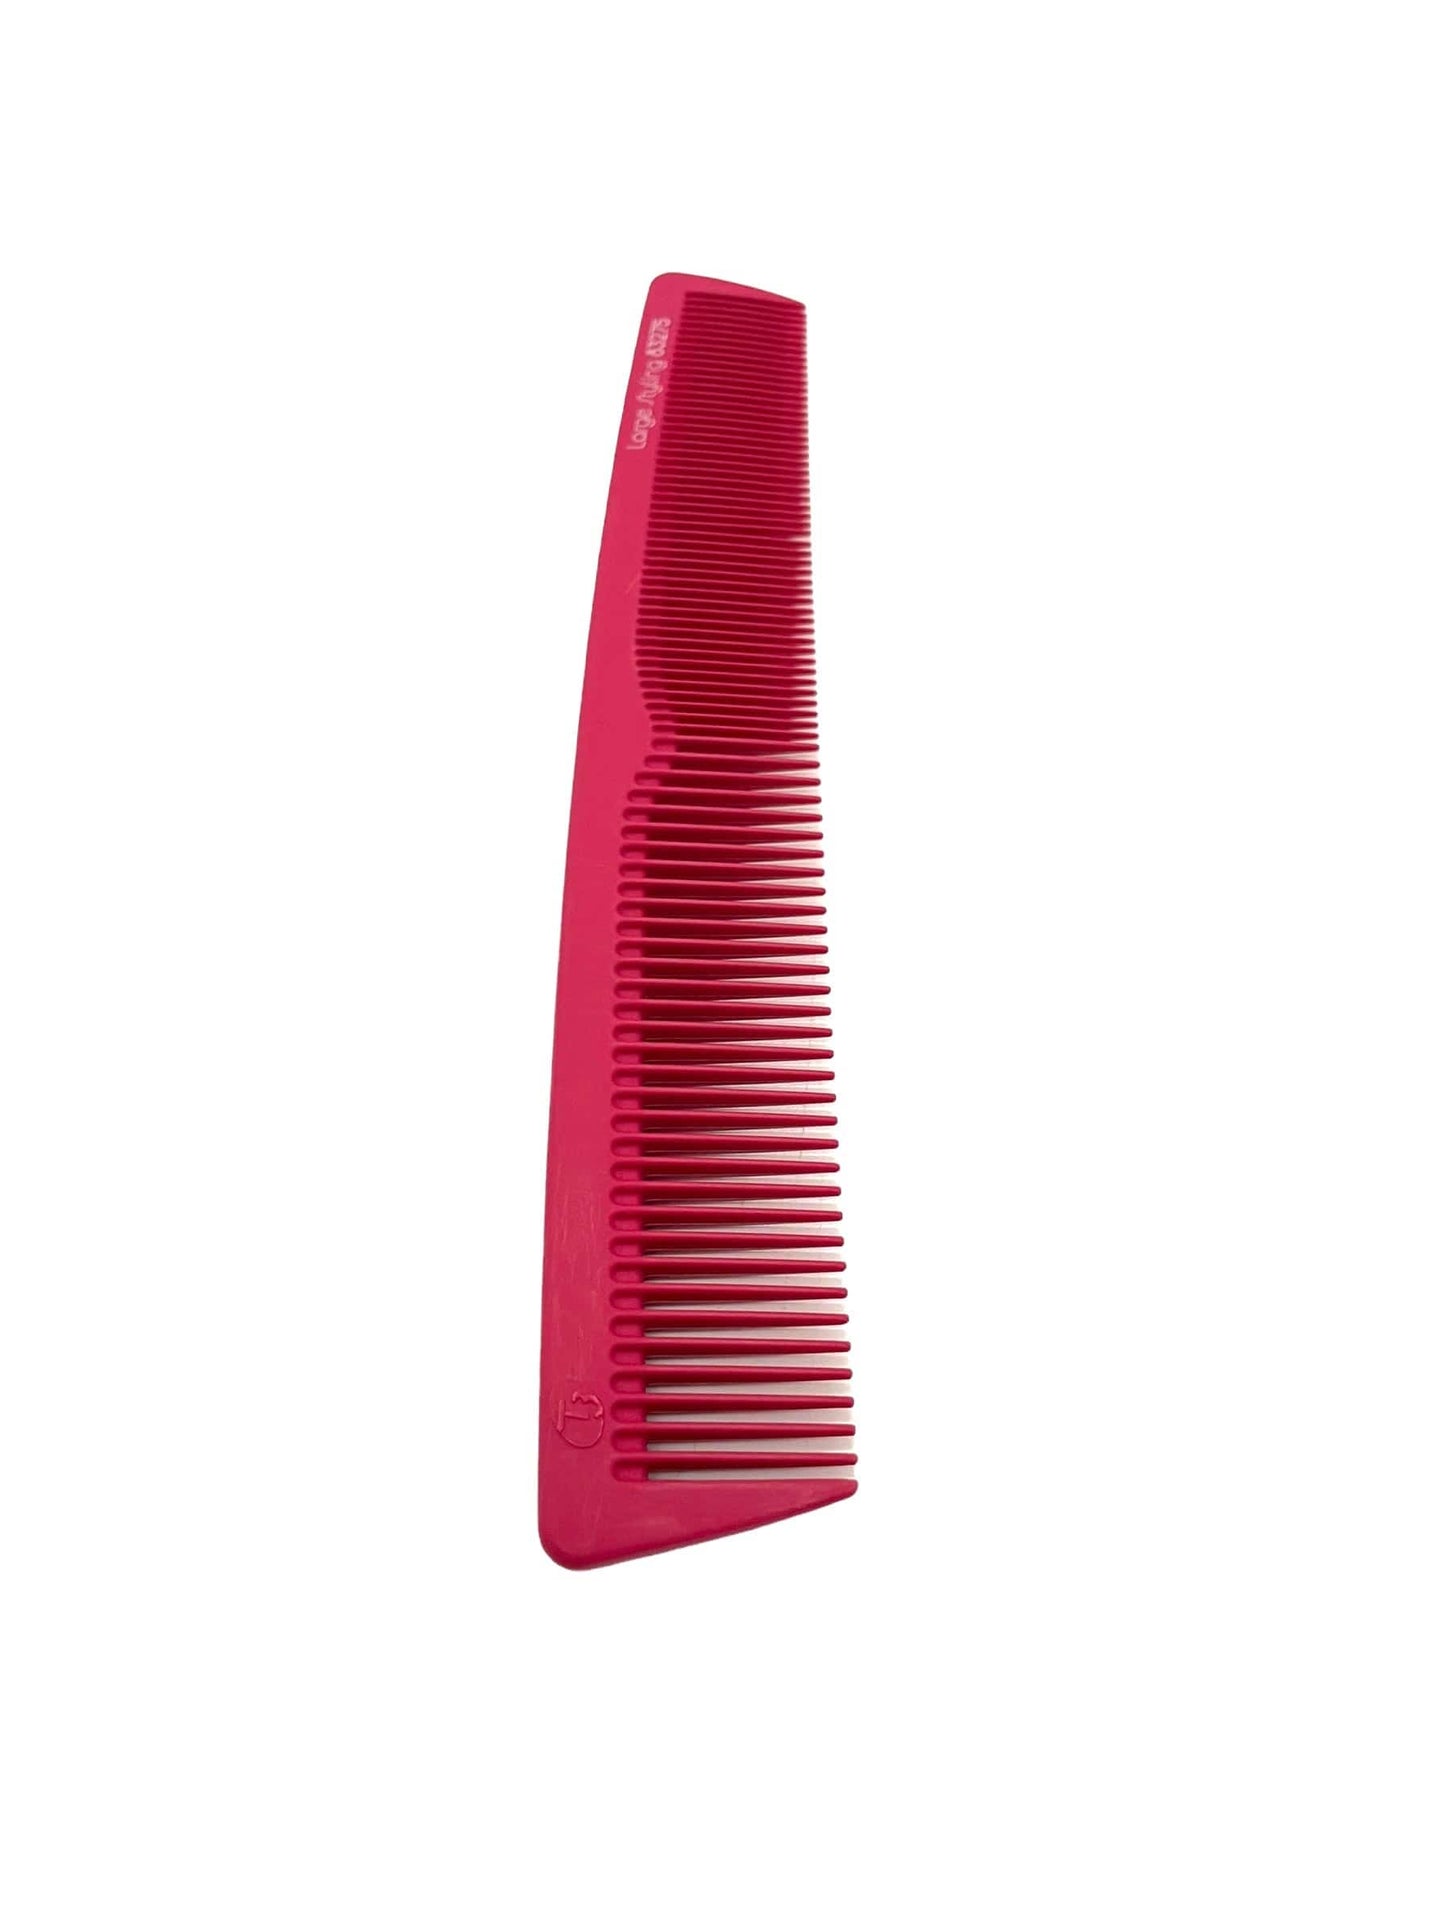 T3 Micro Heat Resistant Bespoke Labs Carbon Combs Collection 1 pc Hair Styling Tools